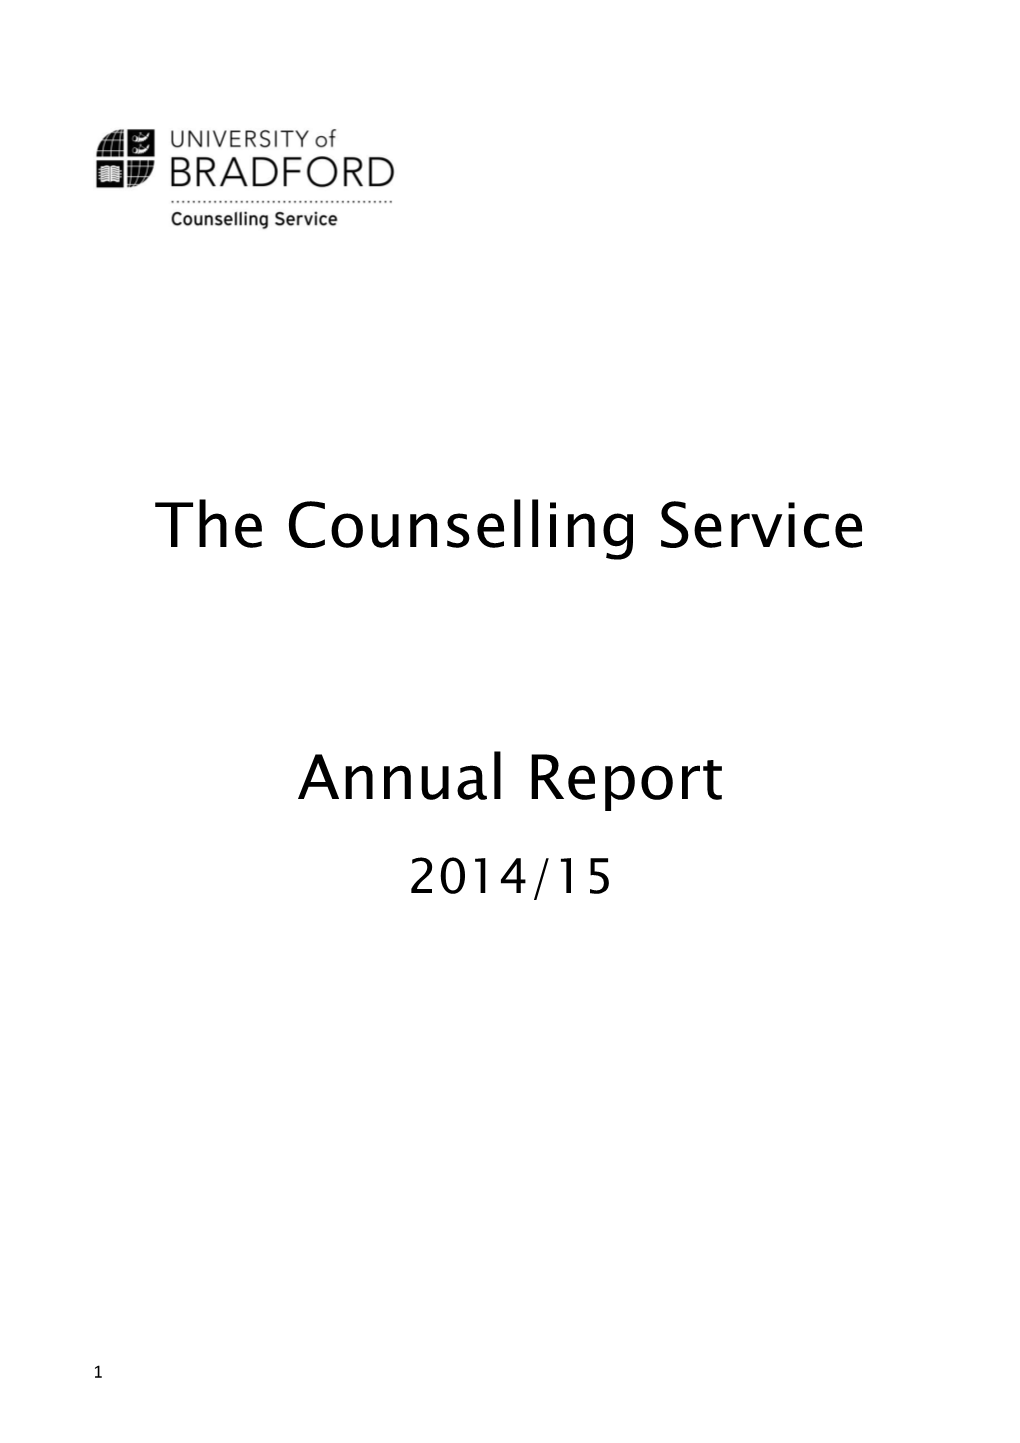 The Counselling Service